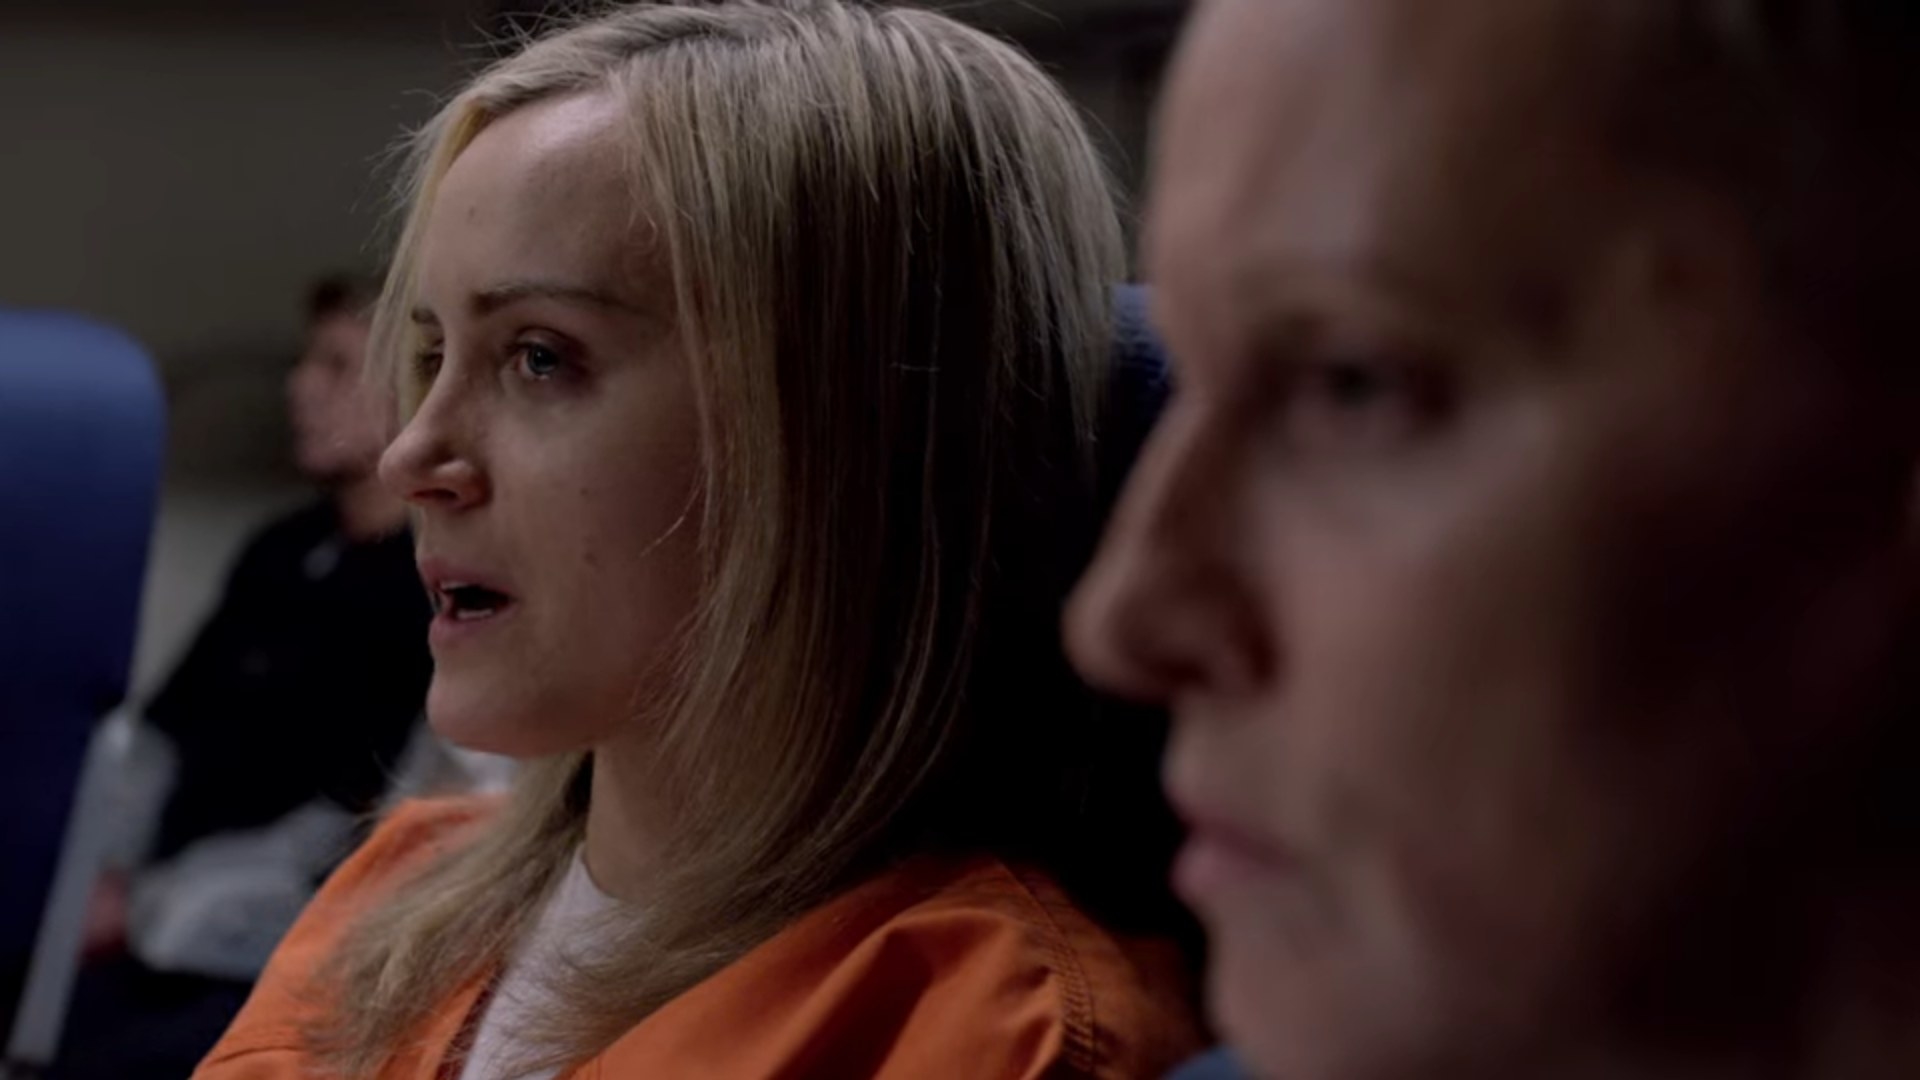 Piper sitting in an airplane in orange overalls